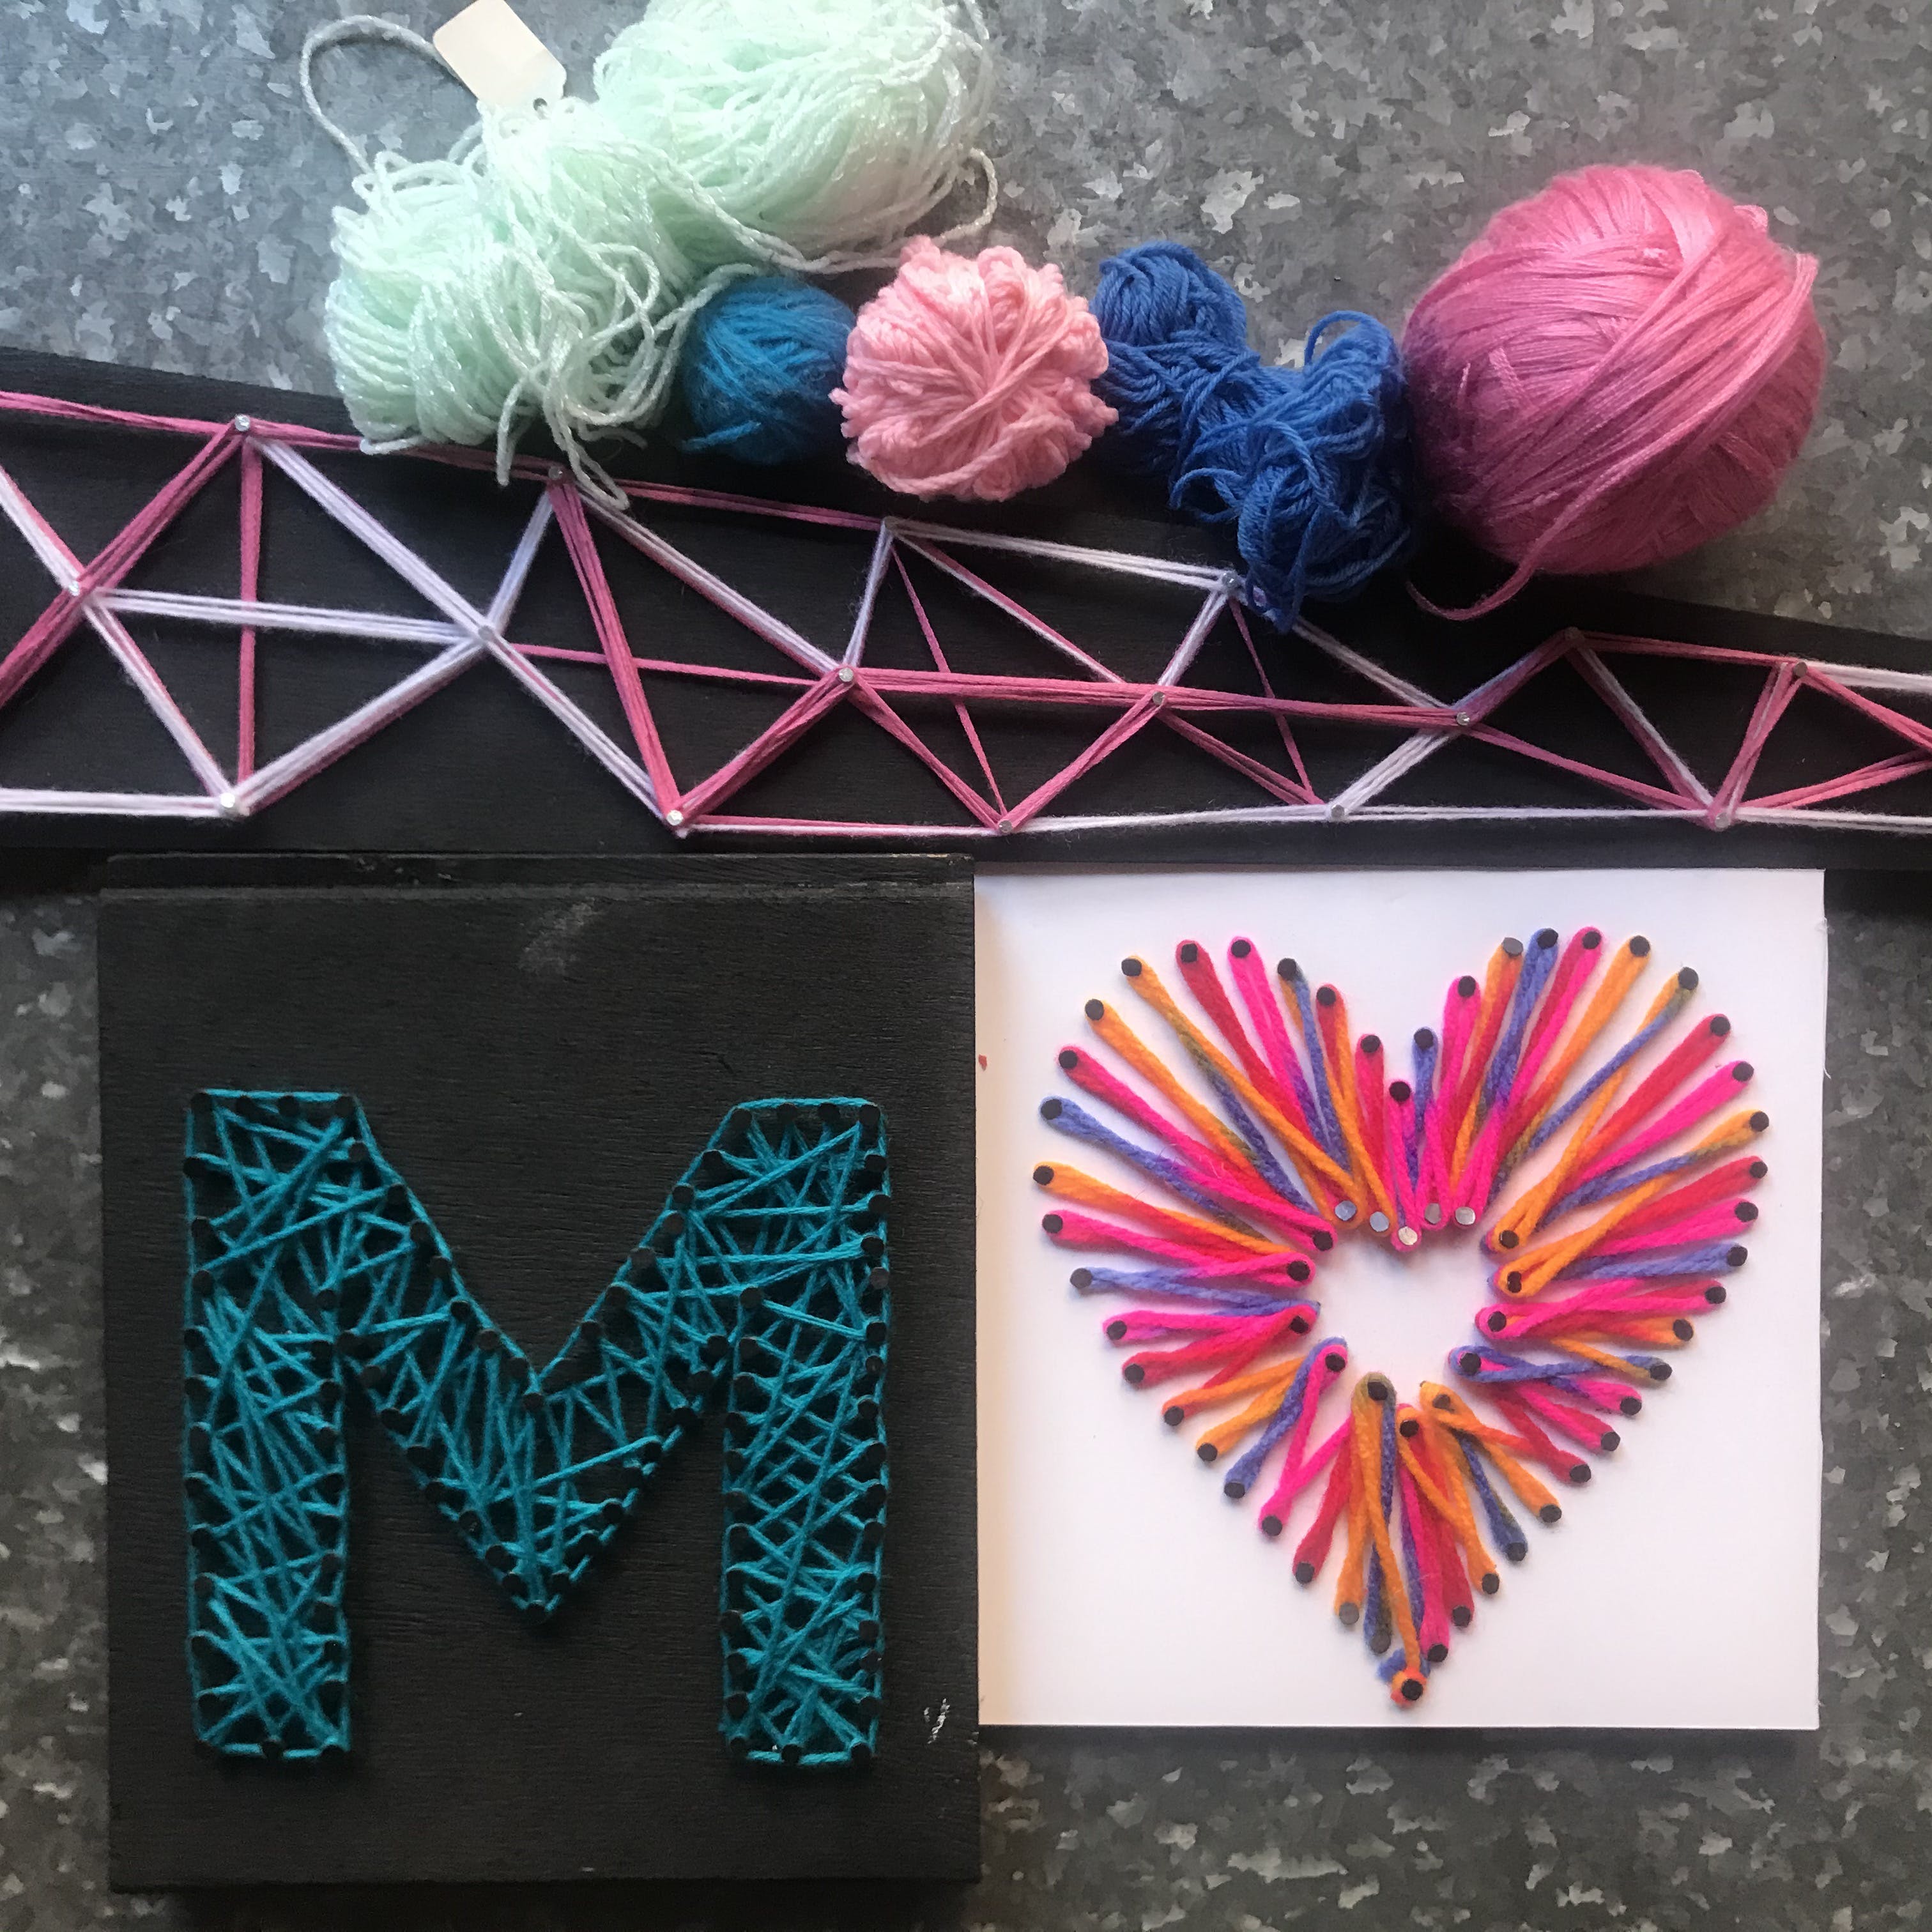 String Art Class For Kids 8-12 Years - Pubs Sydney 0